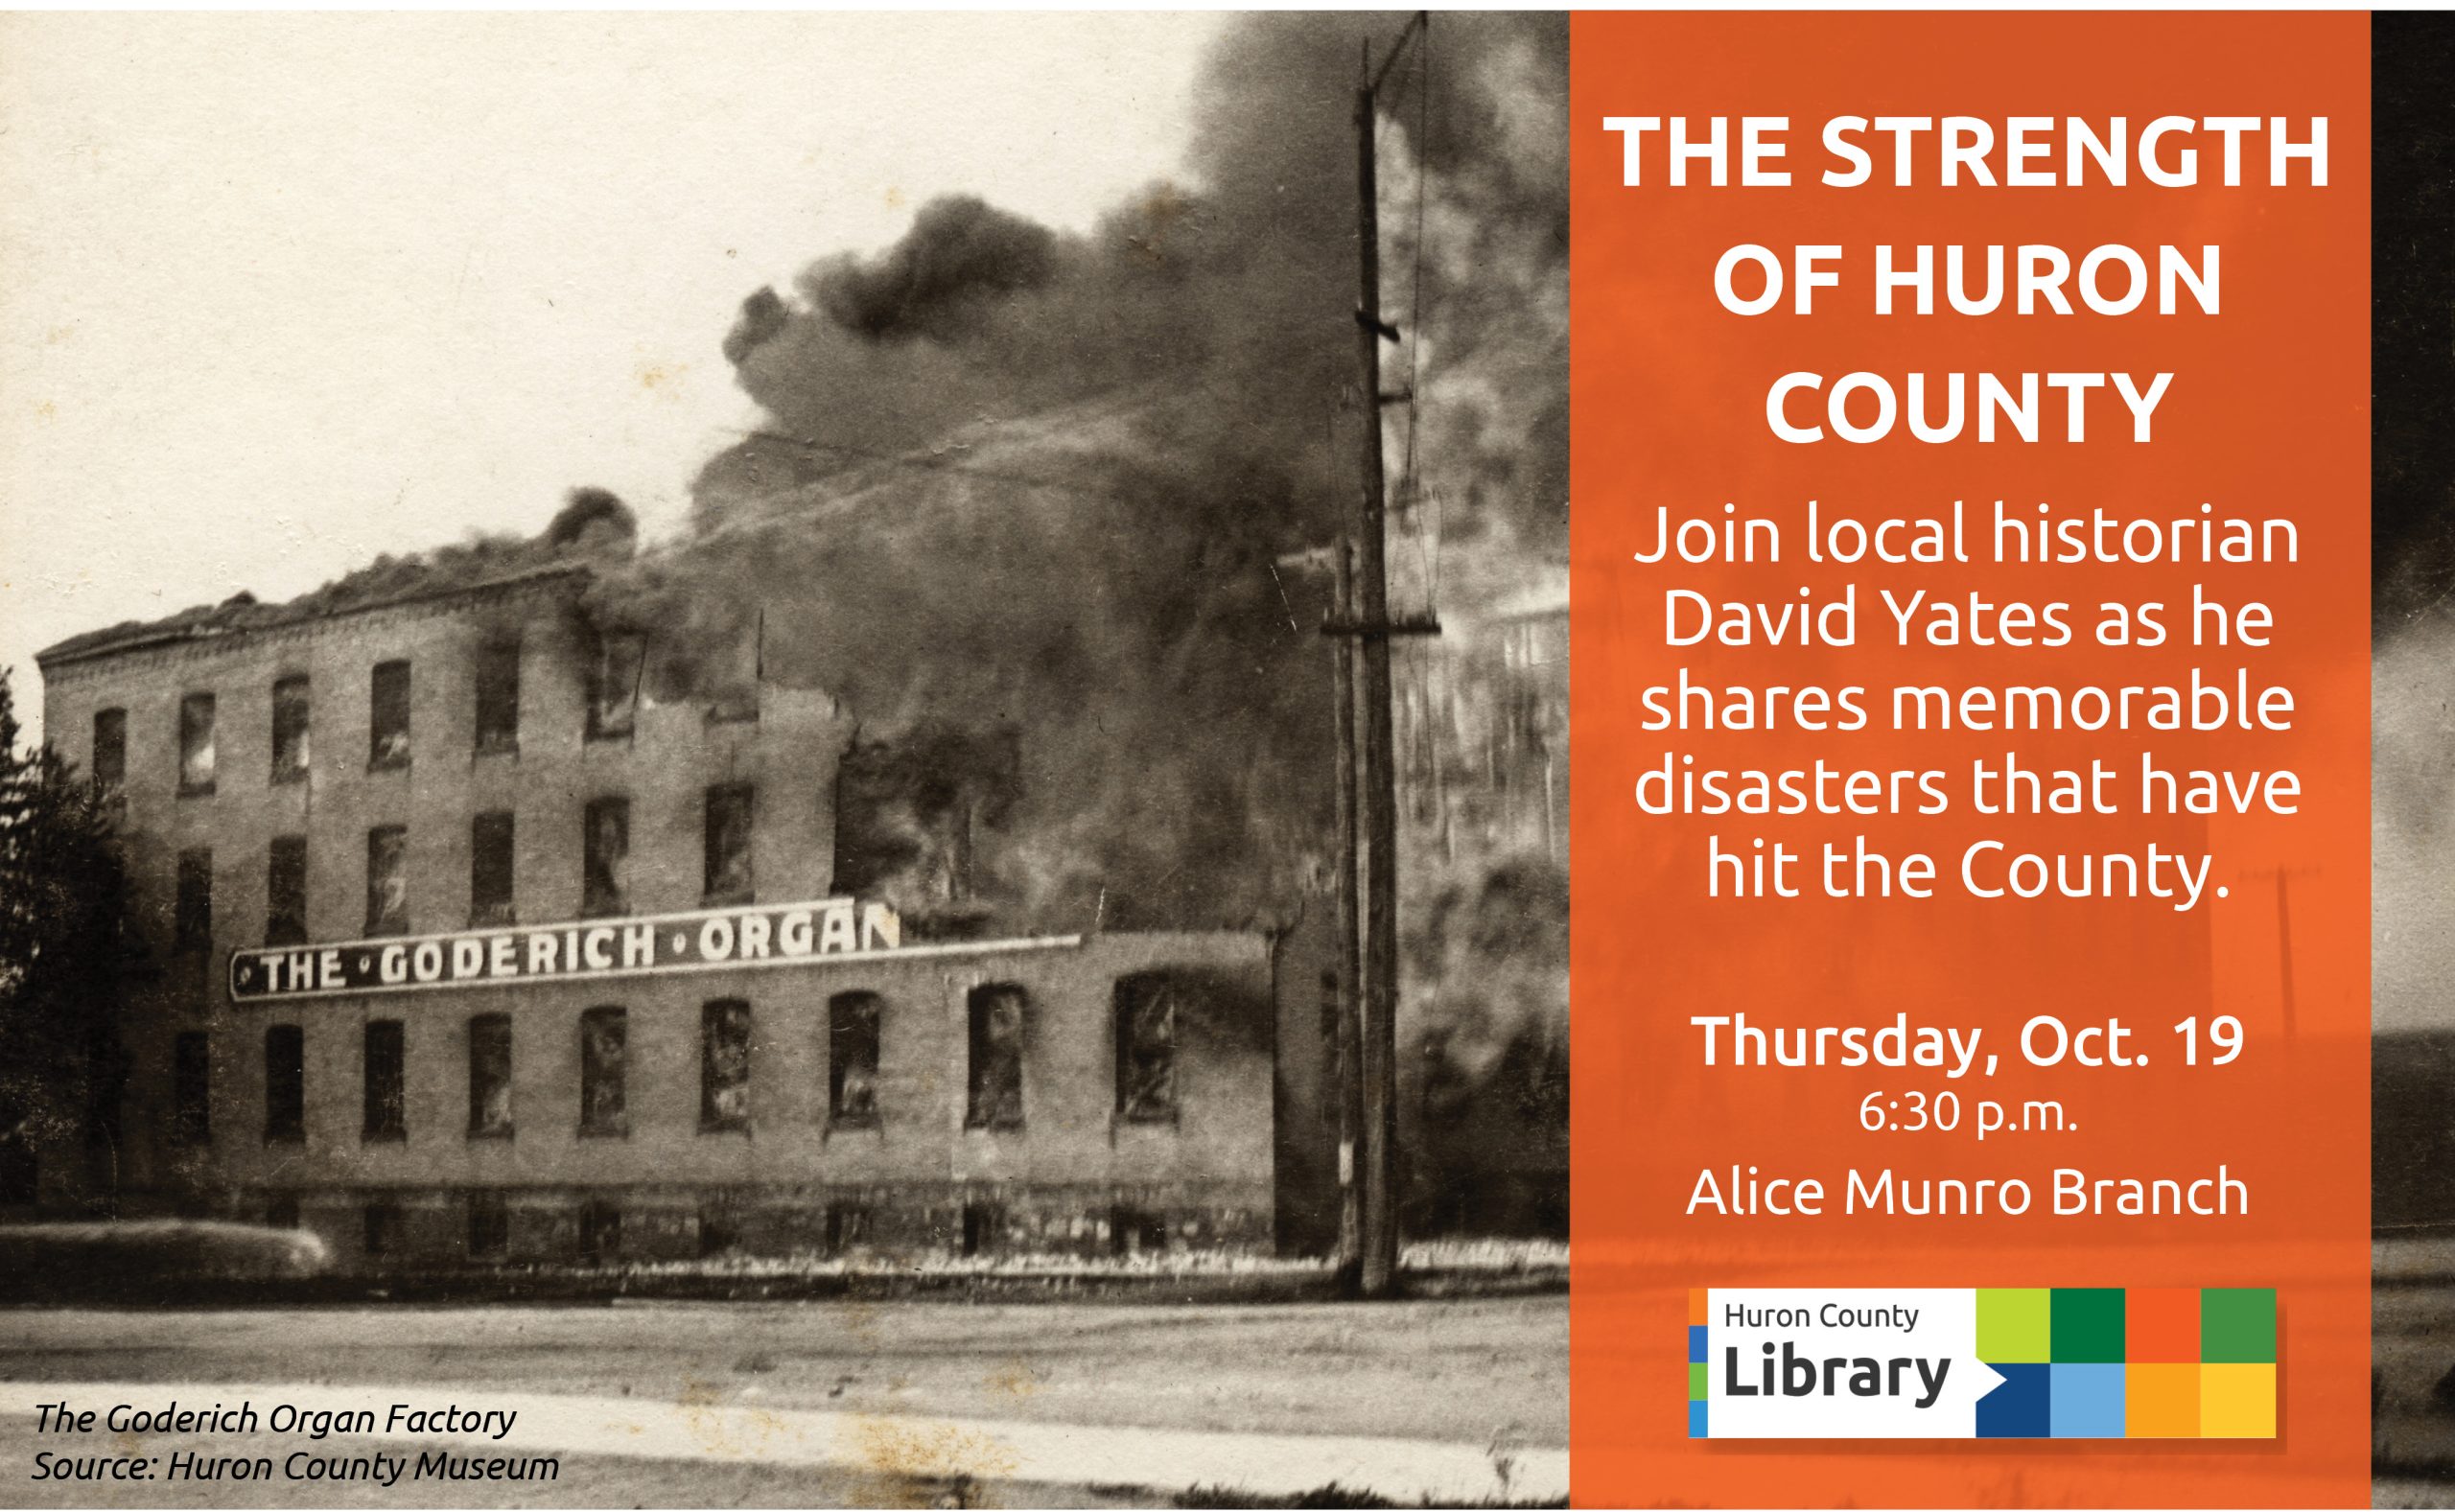 Historic image of the Goderich organ factory on fire with text promoting The Strength of Huron County at Alice Munro Branch